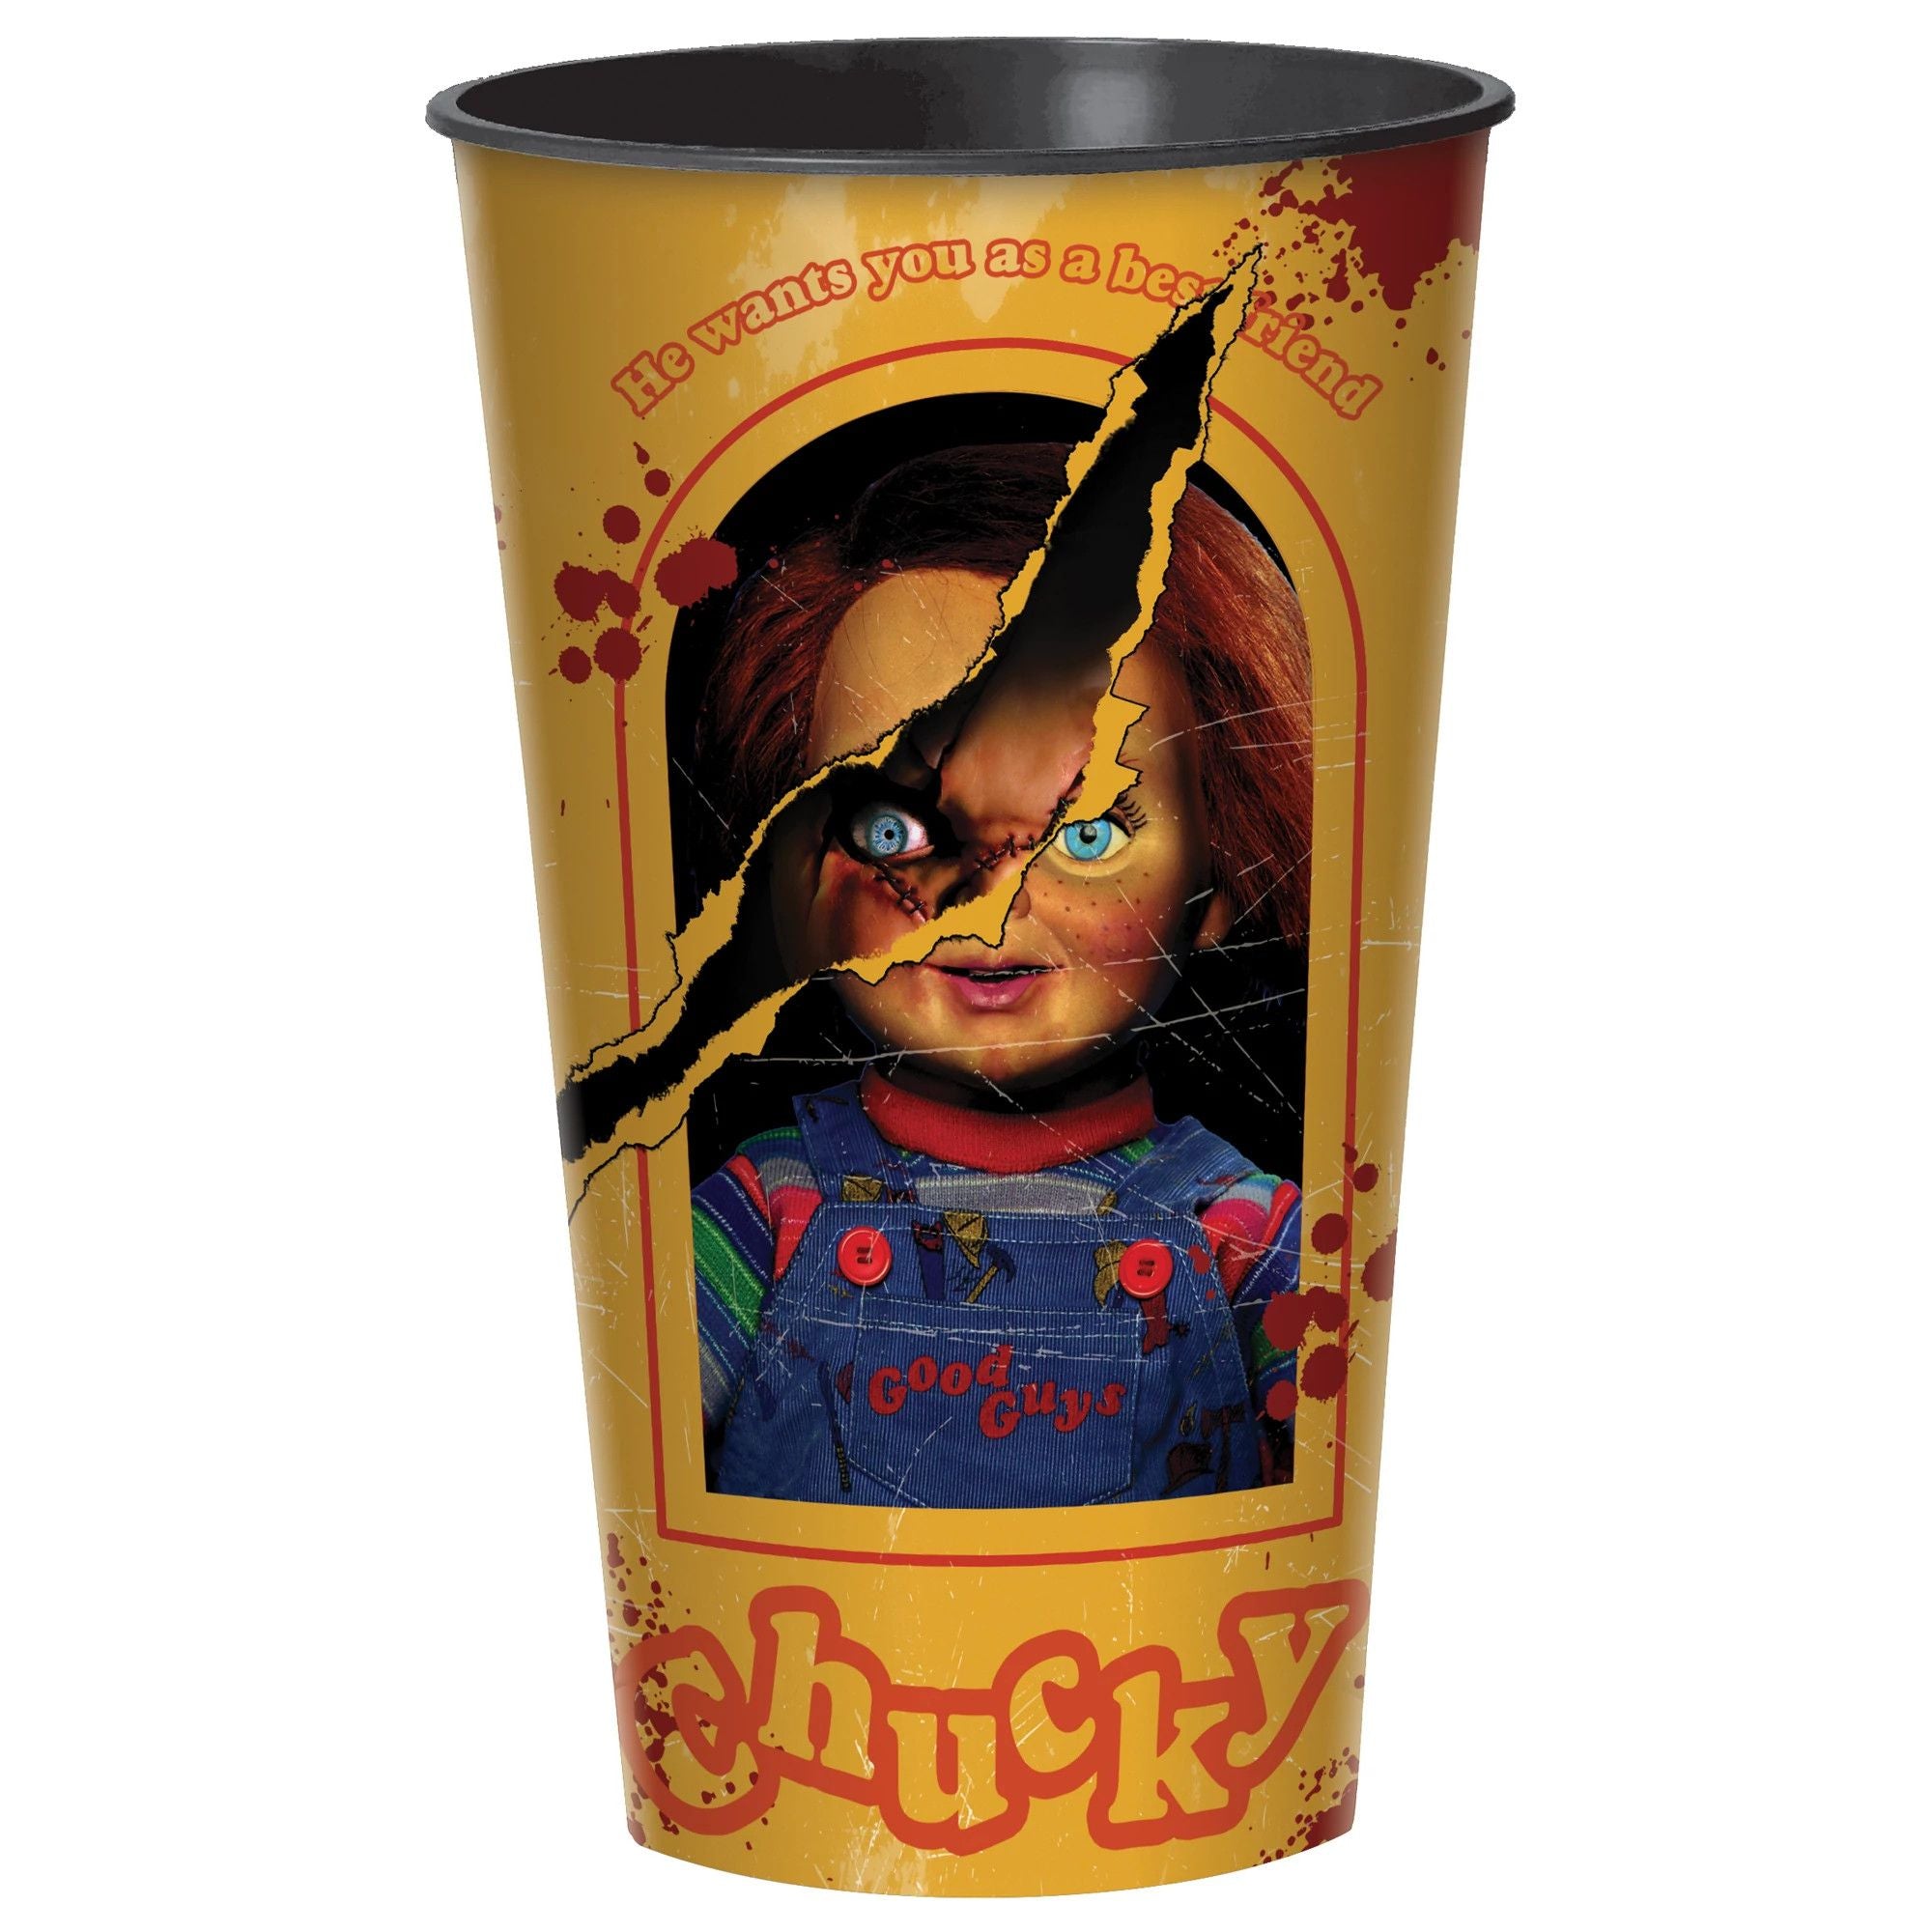 Child's Play Chucky Plastic Cup, 32 oz.